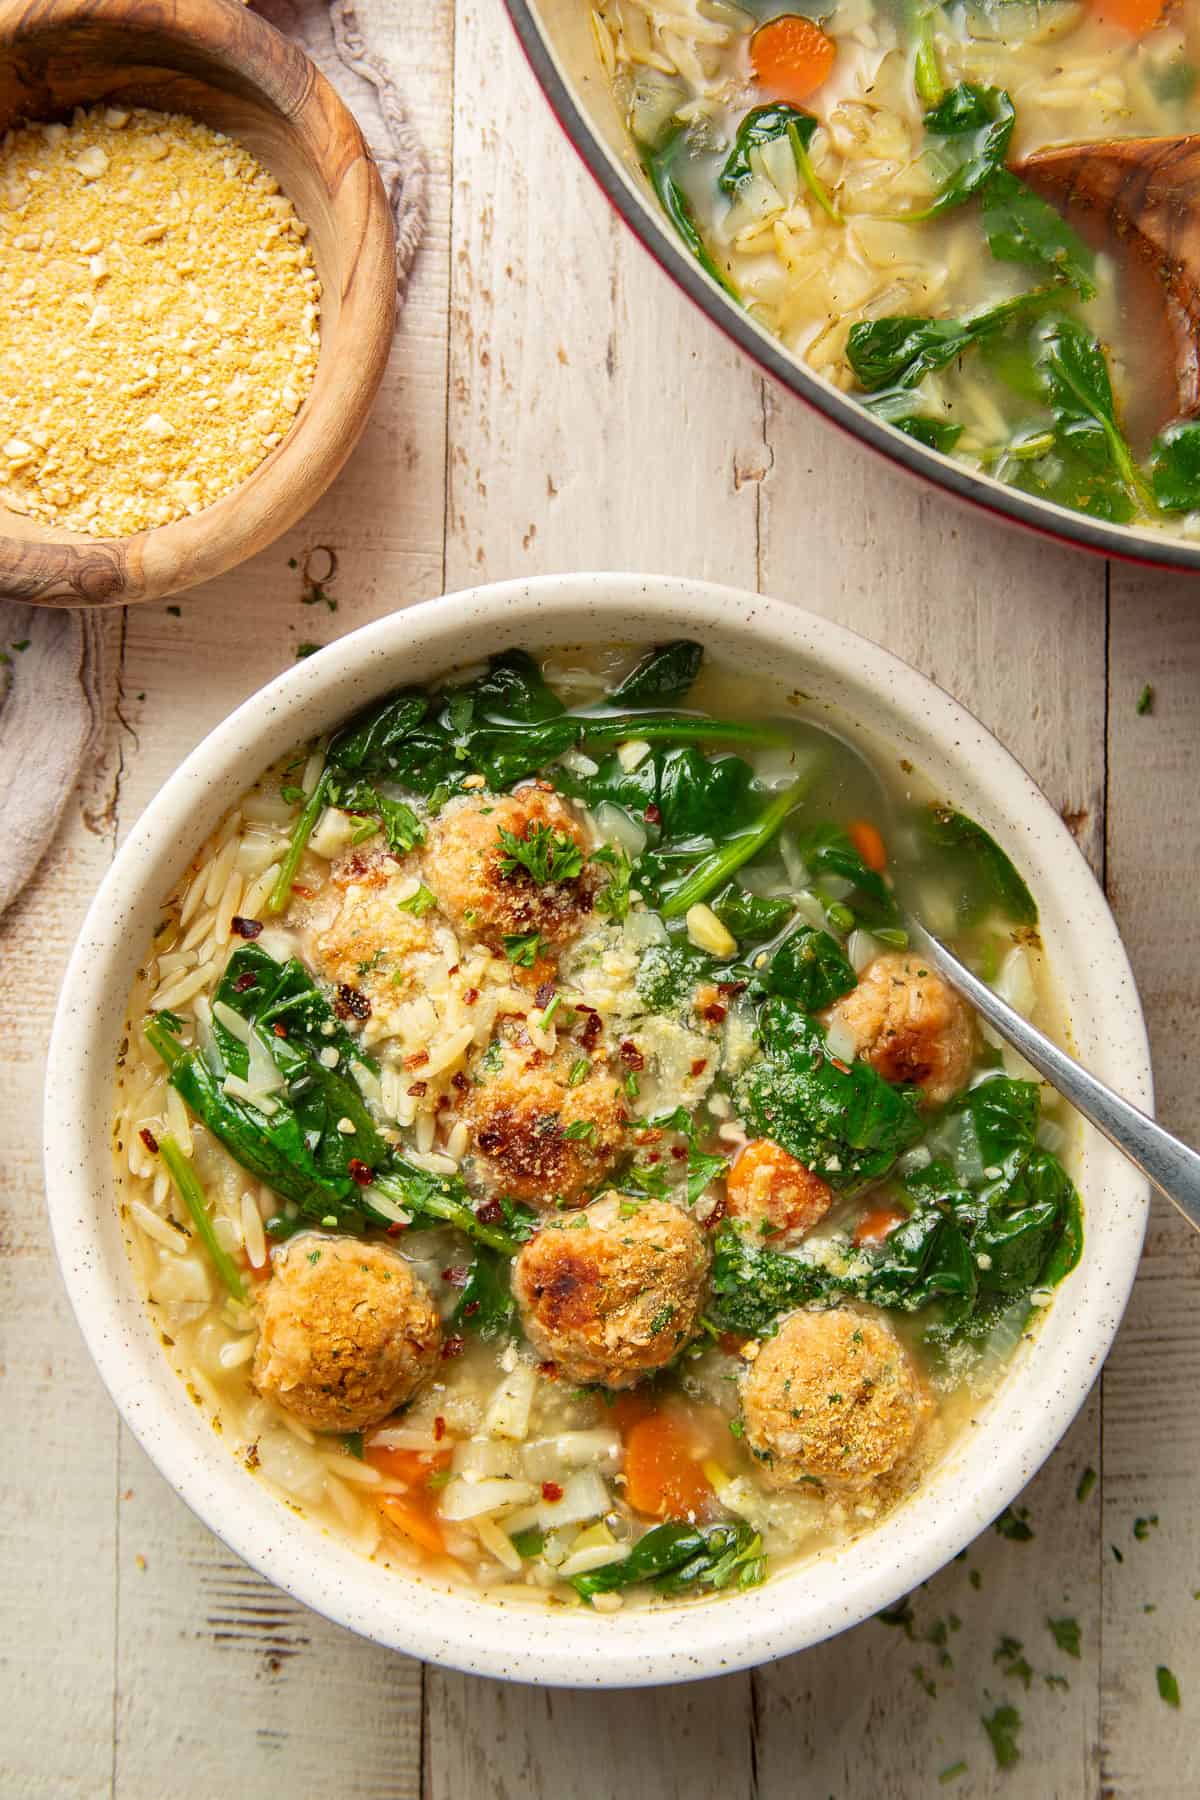 This vegan Italian wedding soup is delicious, comforting, and full of flavor! Made with hearty cannellini bean "meatballs," tender orzo, fennel and spinach, it's packed with vibrant flavors and perfect for cozying up with on a chilly day.